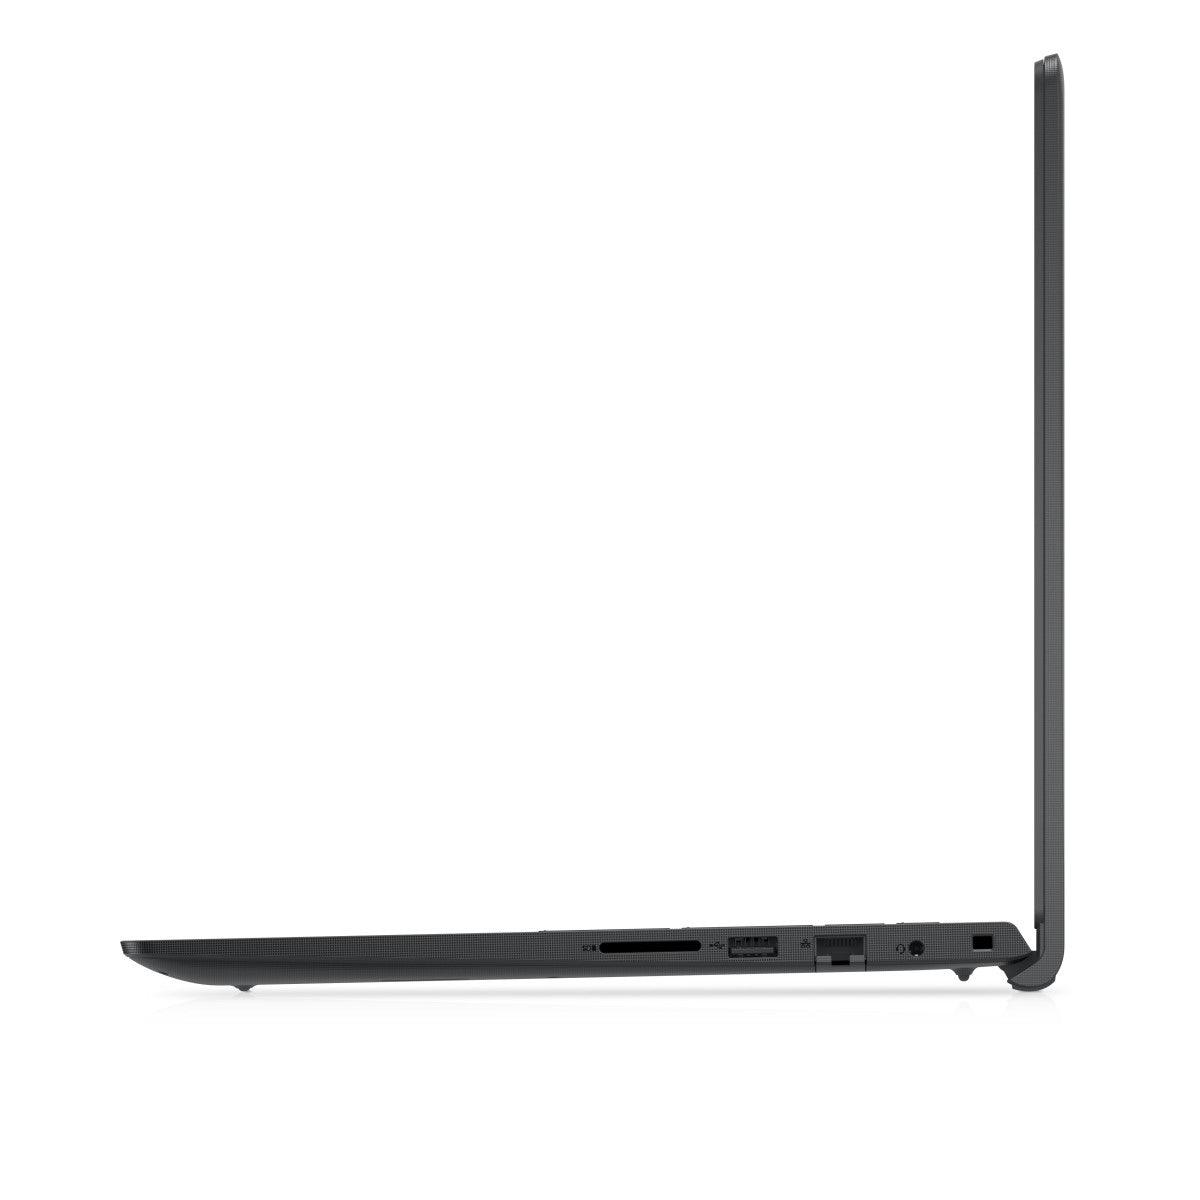 Dell Vostro 3520 15.6 inch Laptop - Want a New Gadget